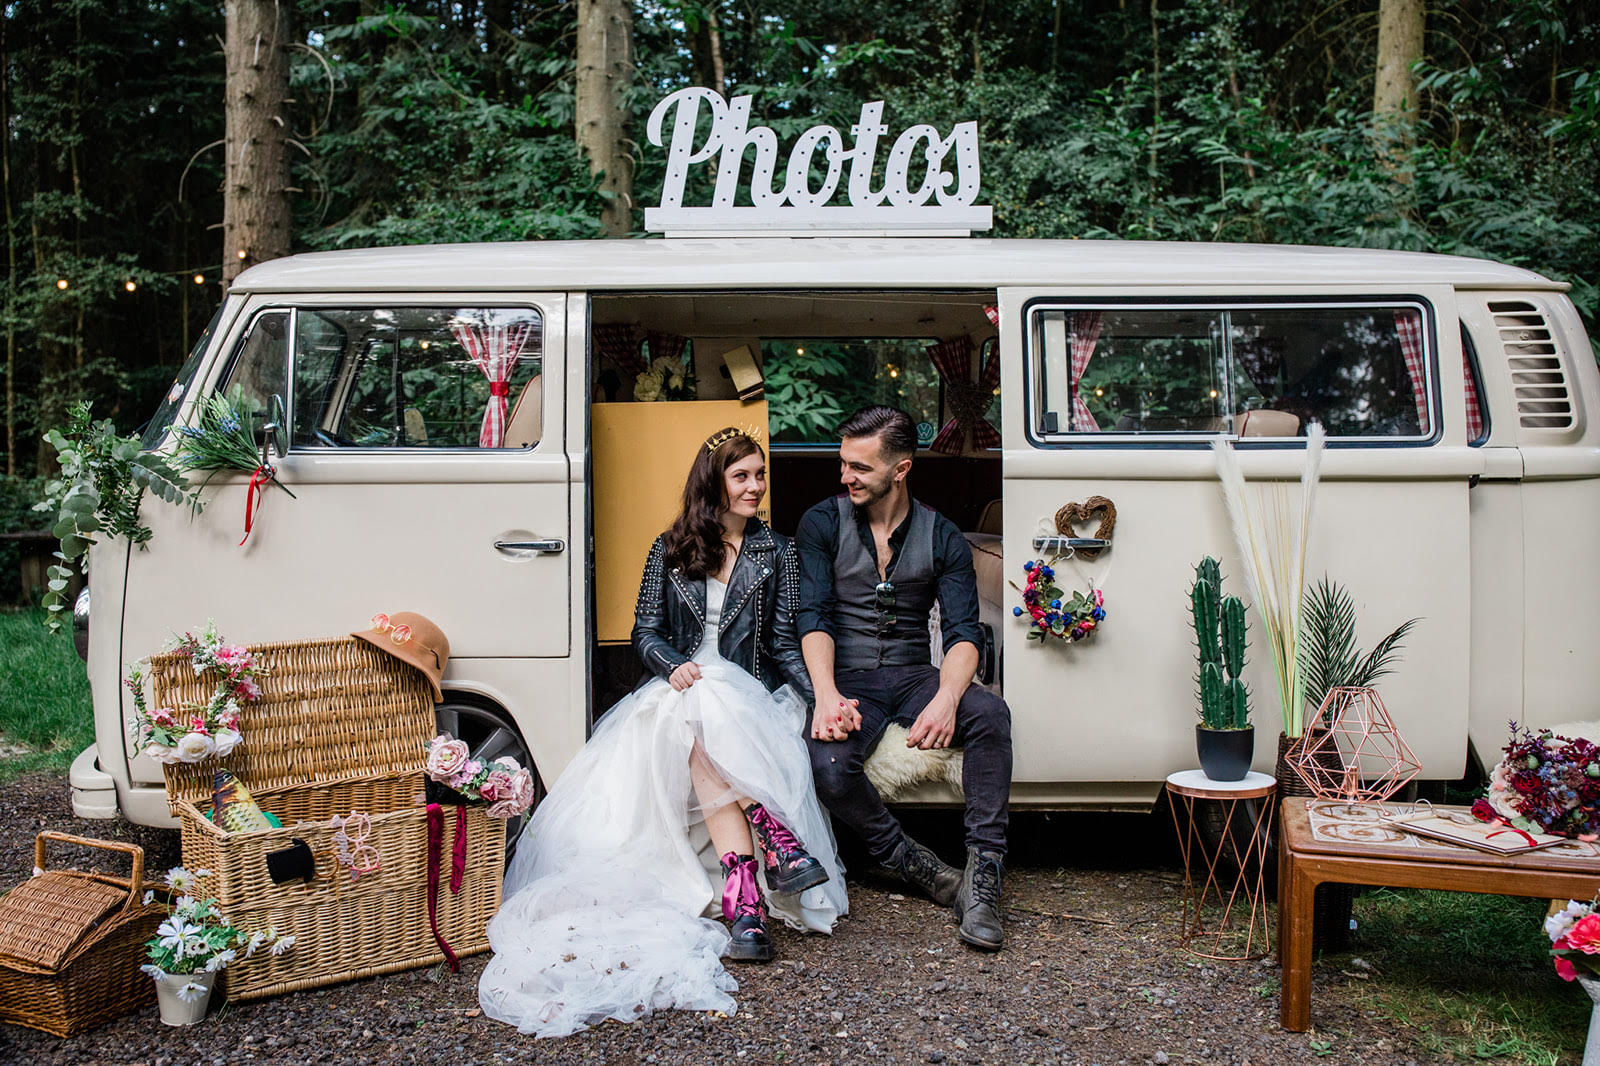 DIY Photo Booth Guide for Weddings & Events